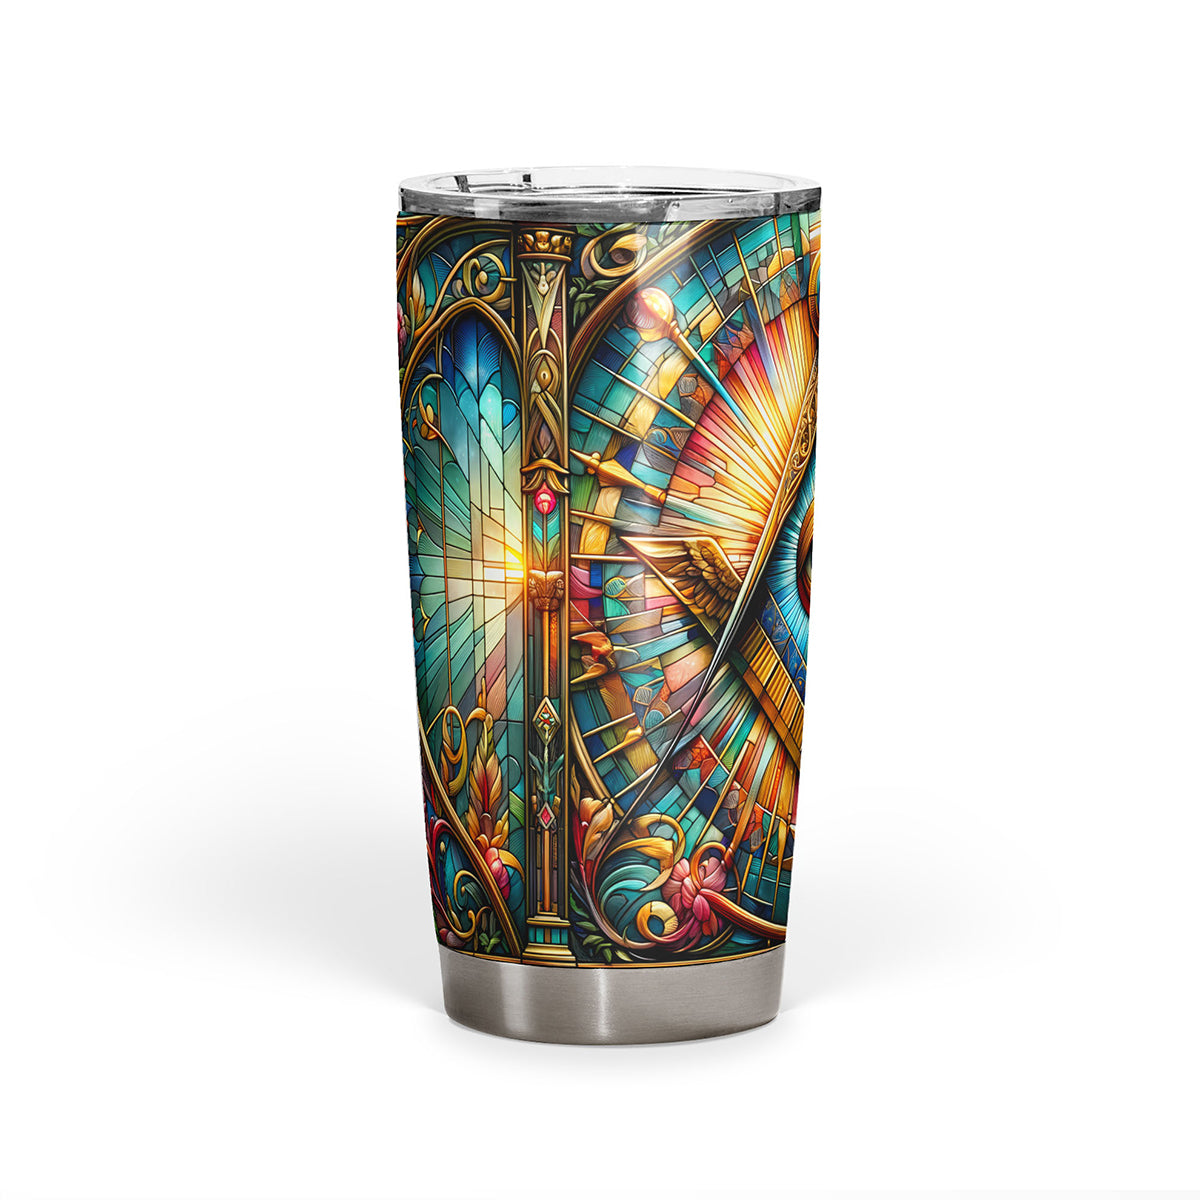 Square & Compass, The All-Seeing Eye Masonic Tumbler